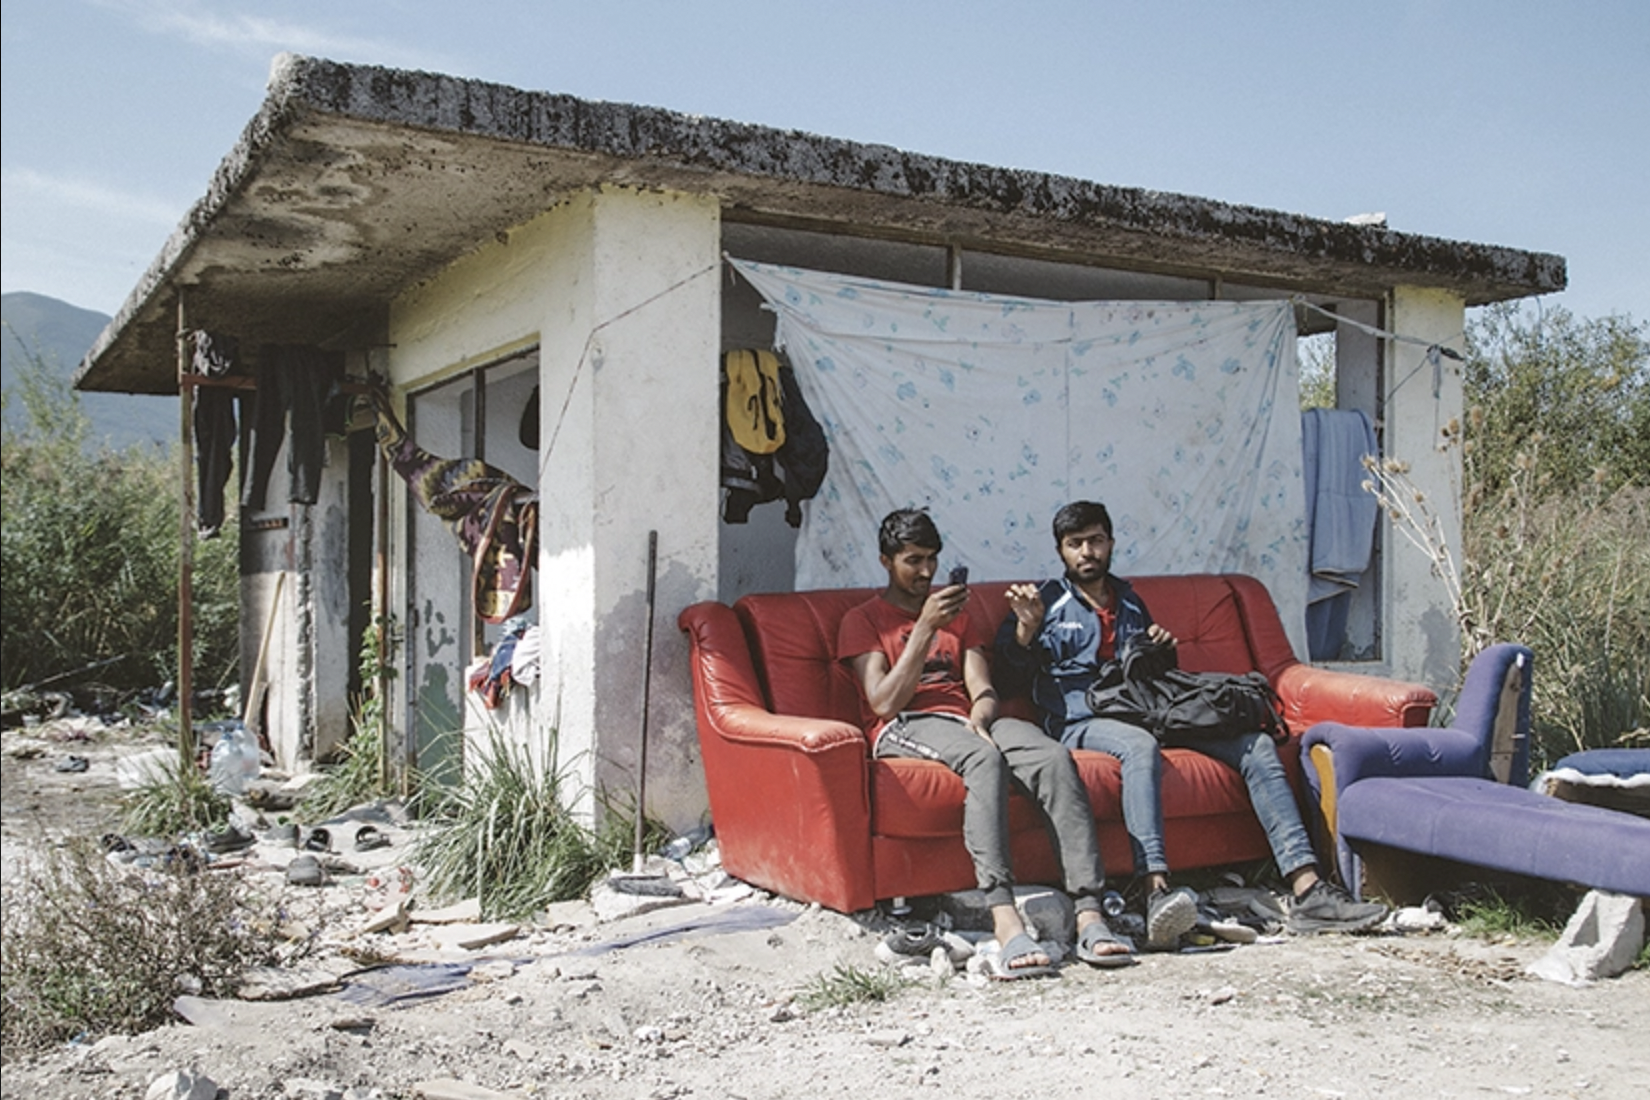 Nearly a year after the fire at Europe’s doorstep, conditions remain miserable for refugees